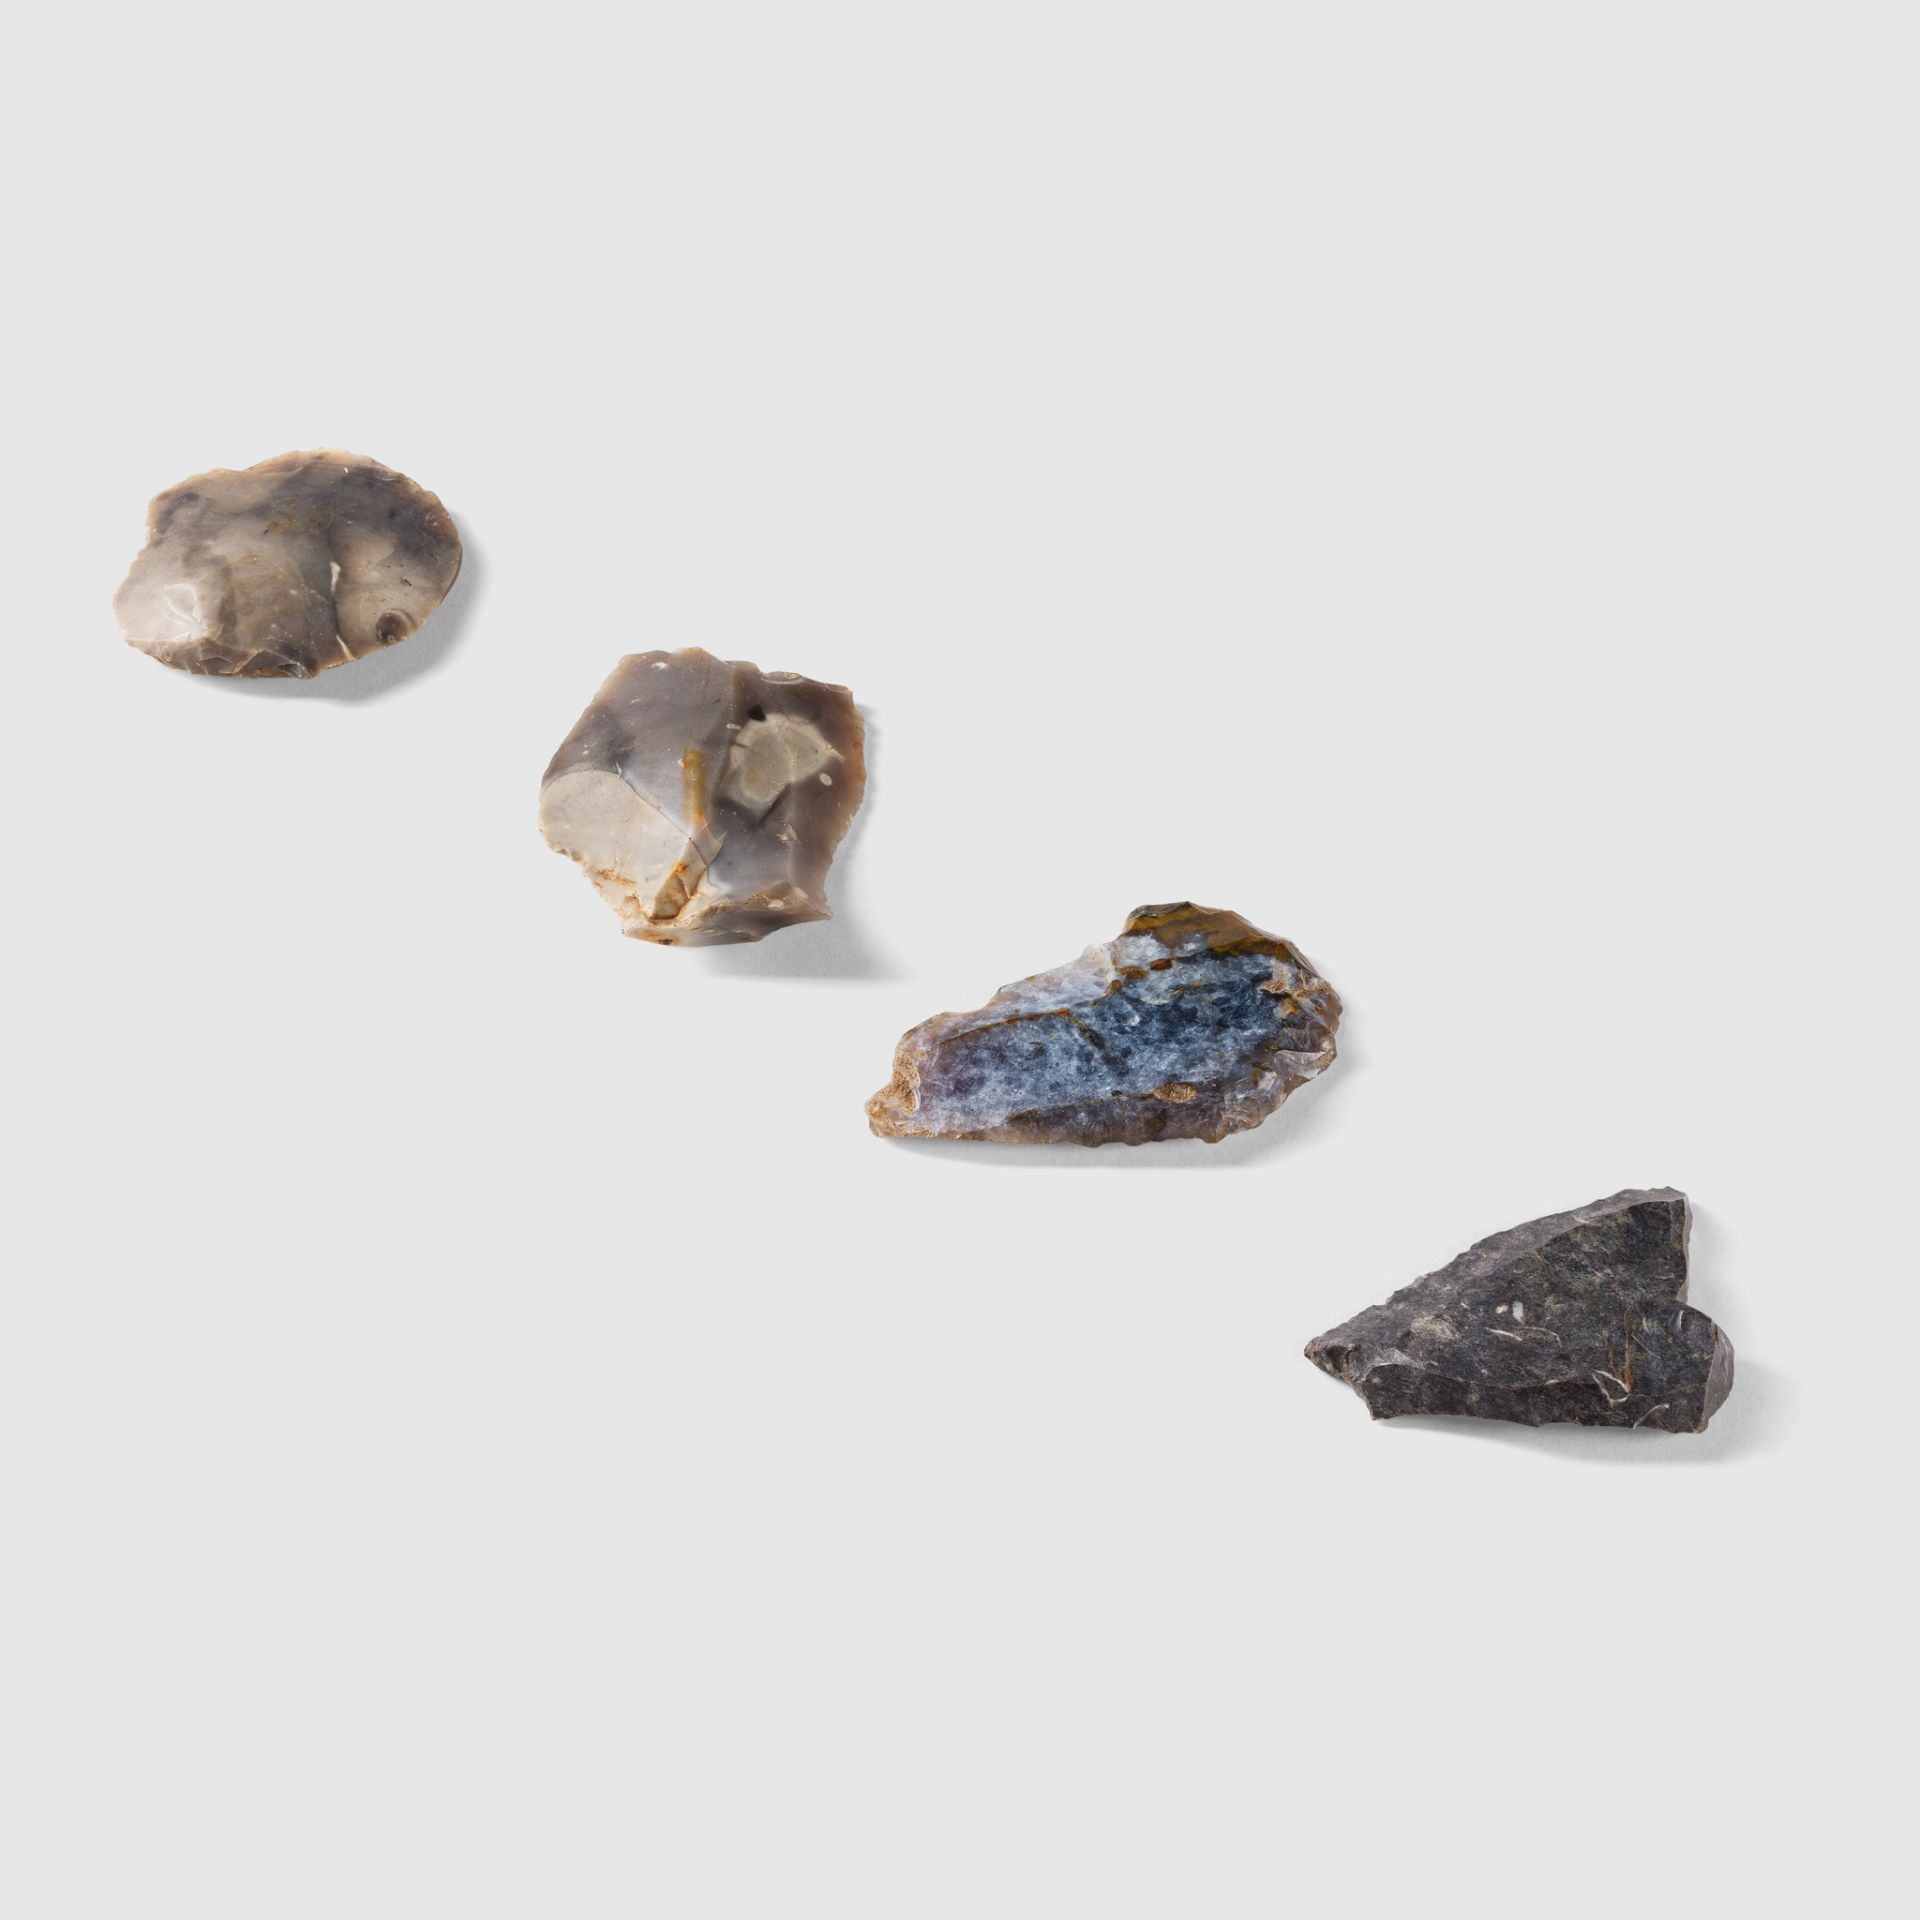 COLLECTION OF NEOLITHIC TOOLS WESTERN EUROPE, 3RD MILLENIUM B.C. - Image 3 of 4